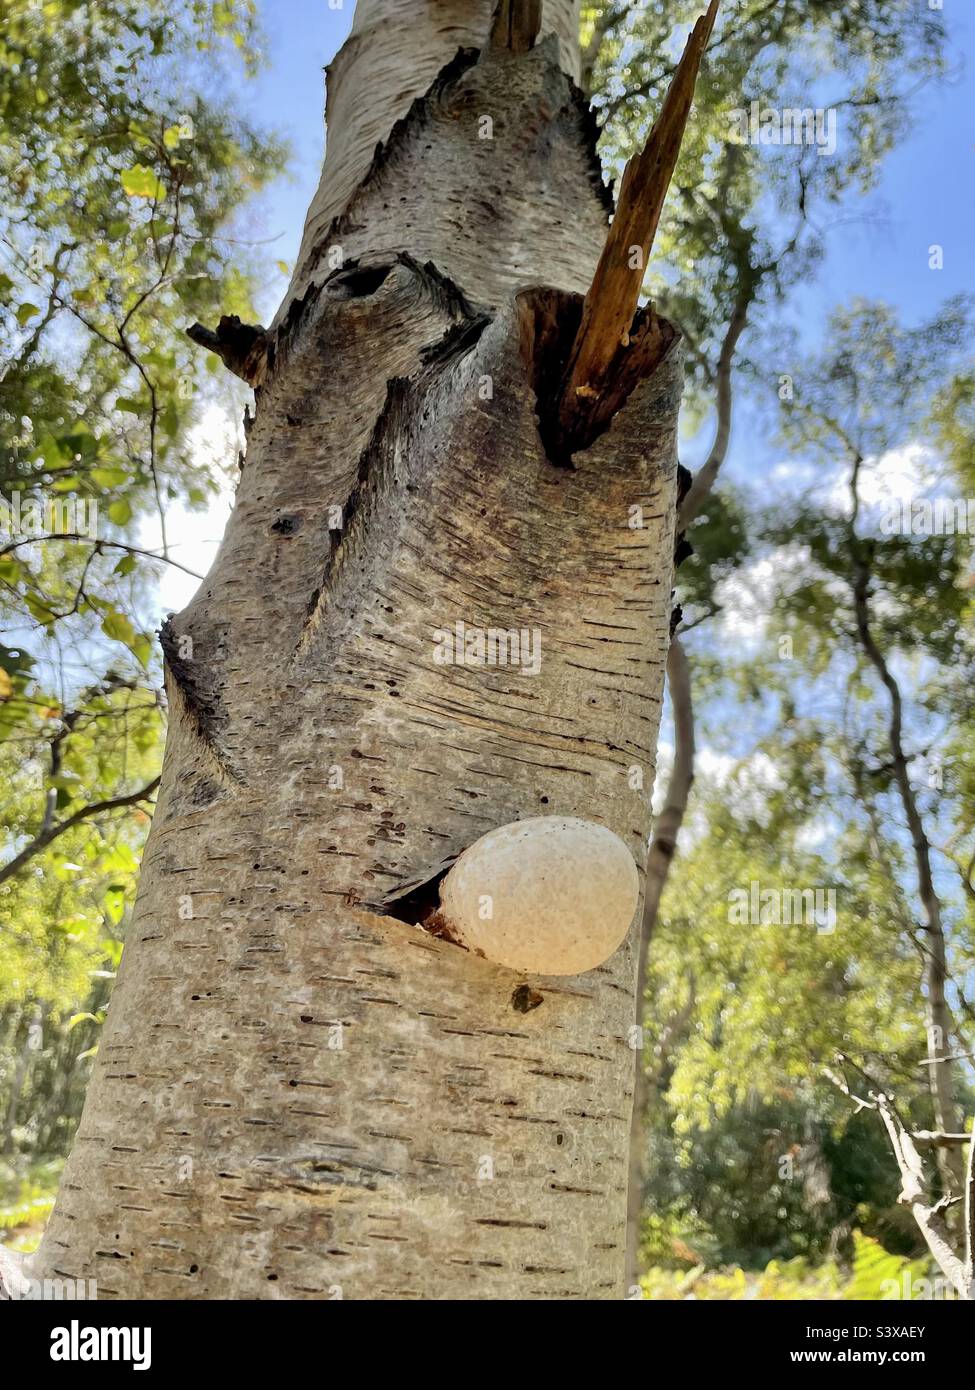 The wonders of nature. This tree trunk looks like a face, with fungus which looks like the tree is blowing bubblegum from its mouth. Stock Photo